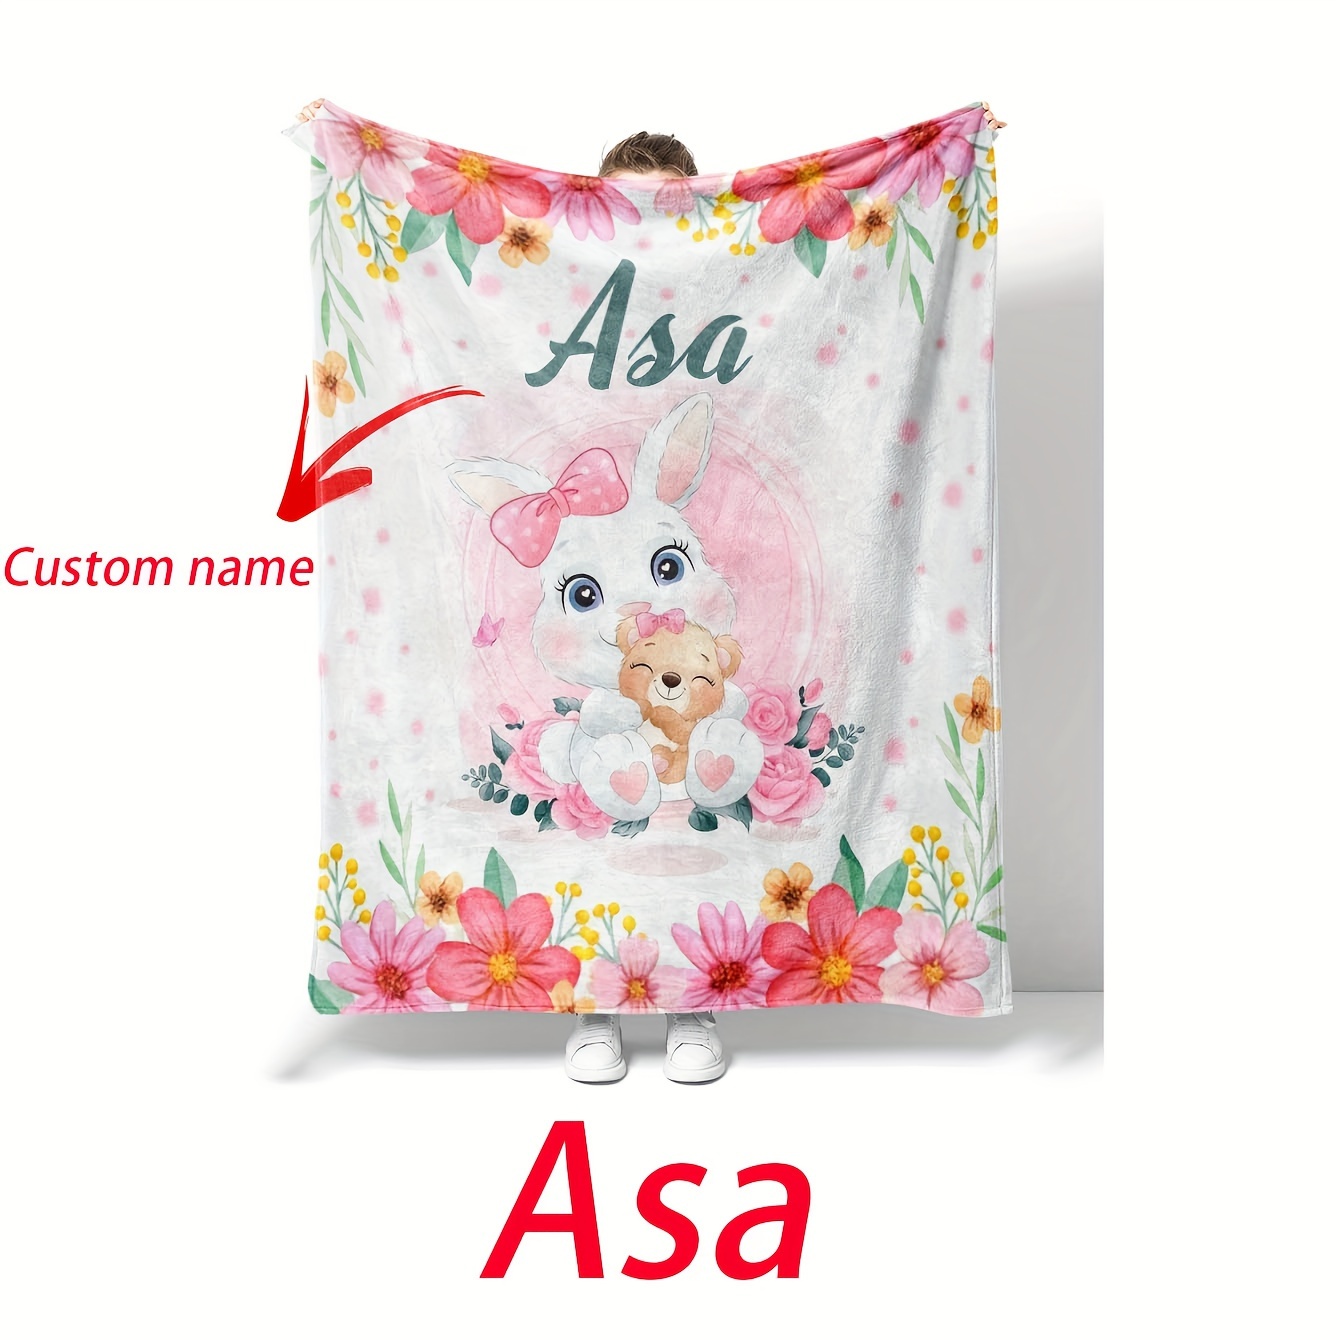 

1pc Custom Flannel Cute Bunny Digital Printed Blanket, Personalized Name Custom Blanket, Suitable For Sofa, Bed, Nap, Interior Decoration, Perfect Birthday Gift Or Holiday Gift, Available All Seasons